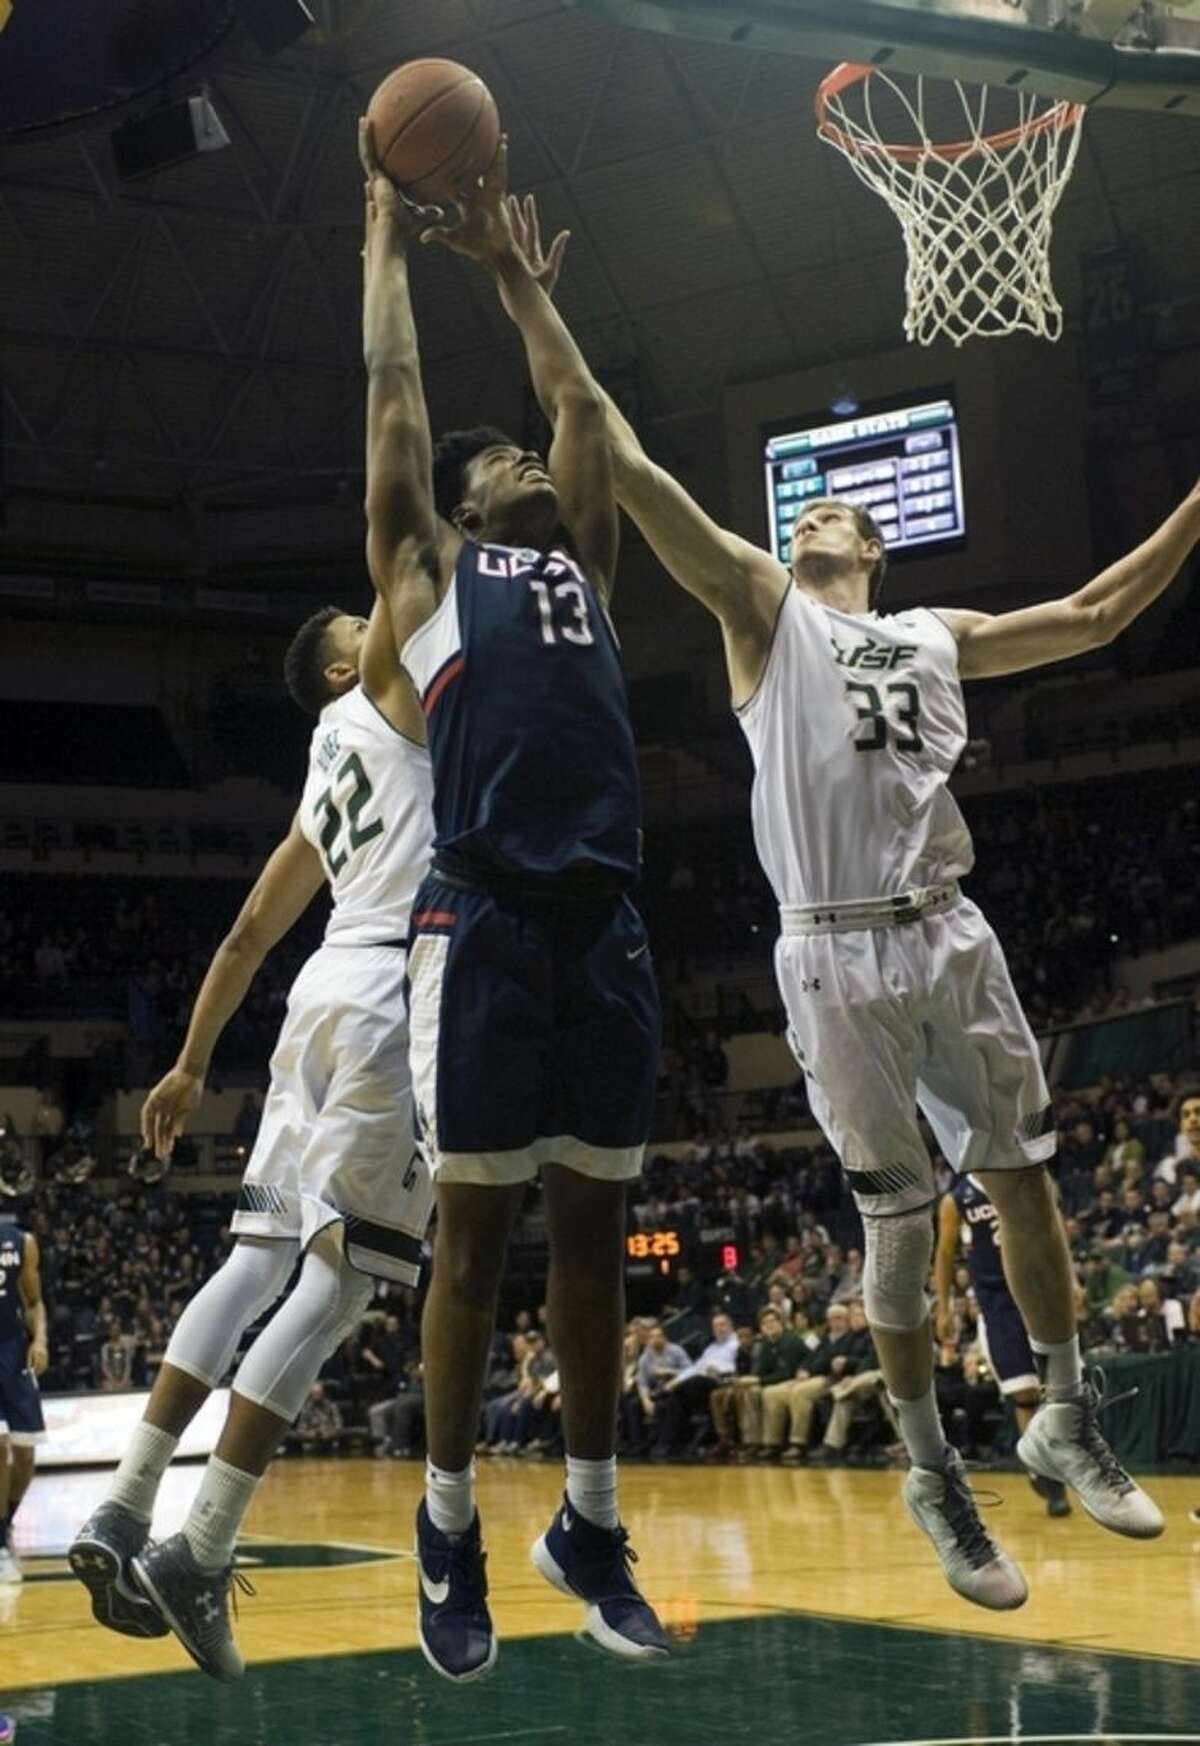 Connecticut's Steven Enoch (13) pulls in a rebound between South Florida's Angel Nunez (22) and Ruben Guerrero (33) during the first half of an NCAA college basketball game Thursday, Feb. 25, 2016 in Tampa, Fla. (AP Photo/Steve Nesius)